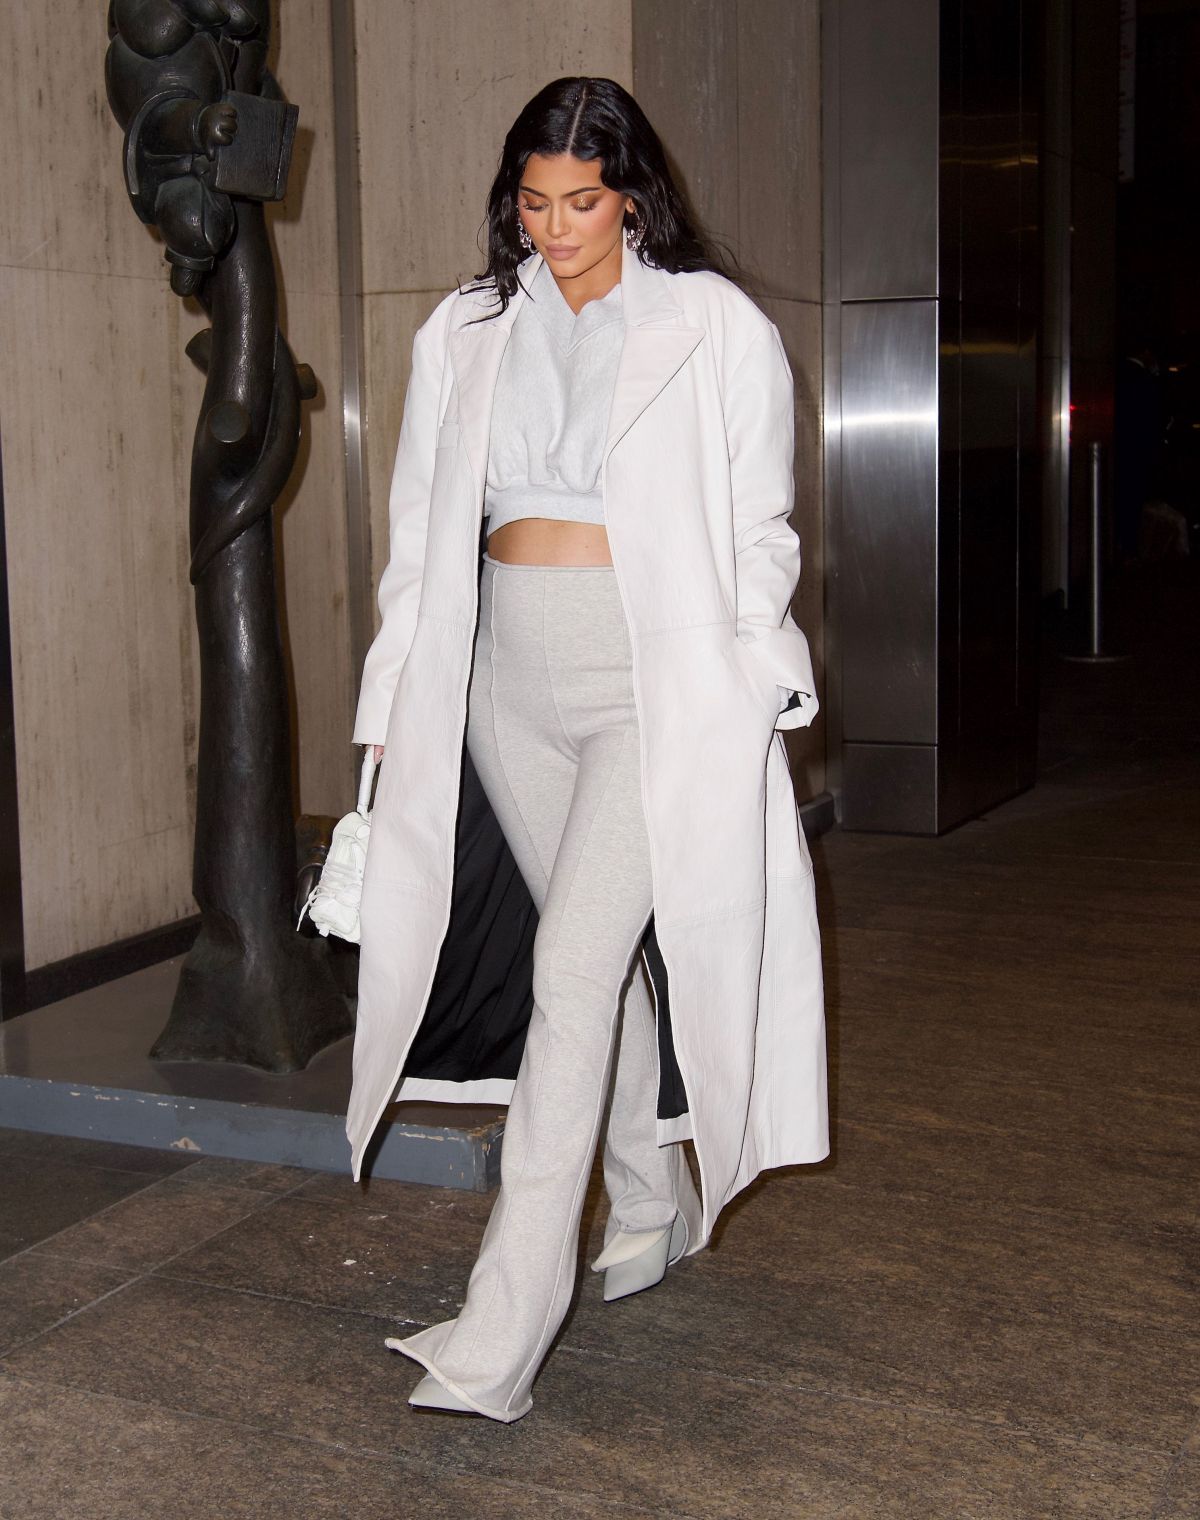 Pregnant KYLIE JENNER at Nobu in New York 09/10/2021 – HawtCelebs